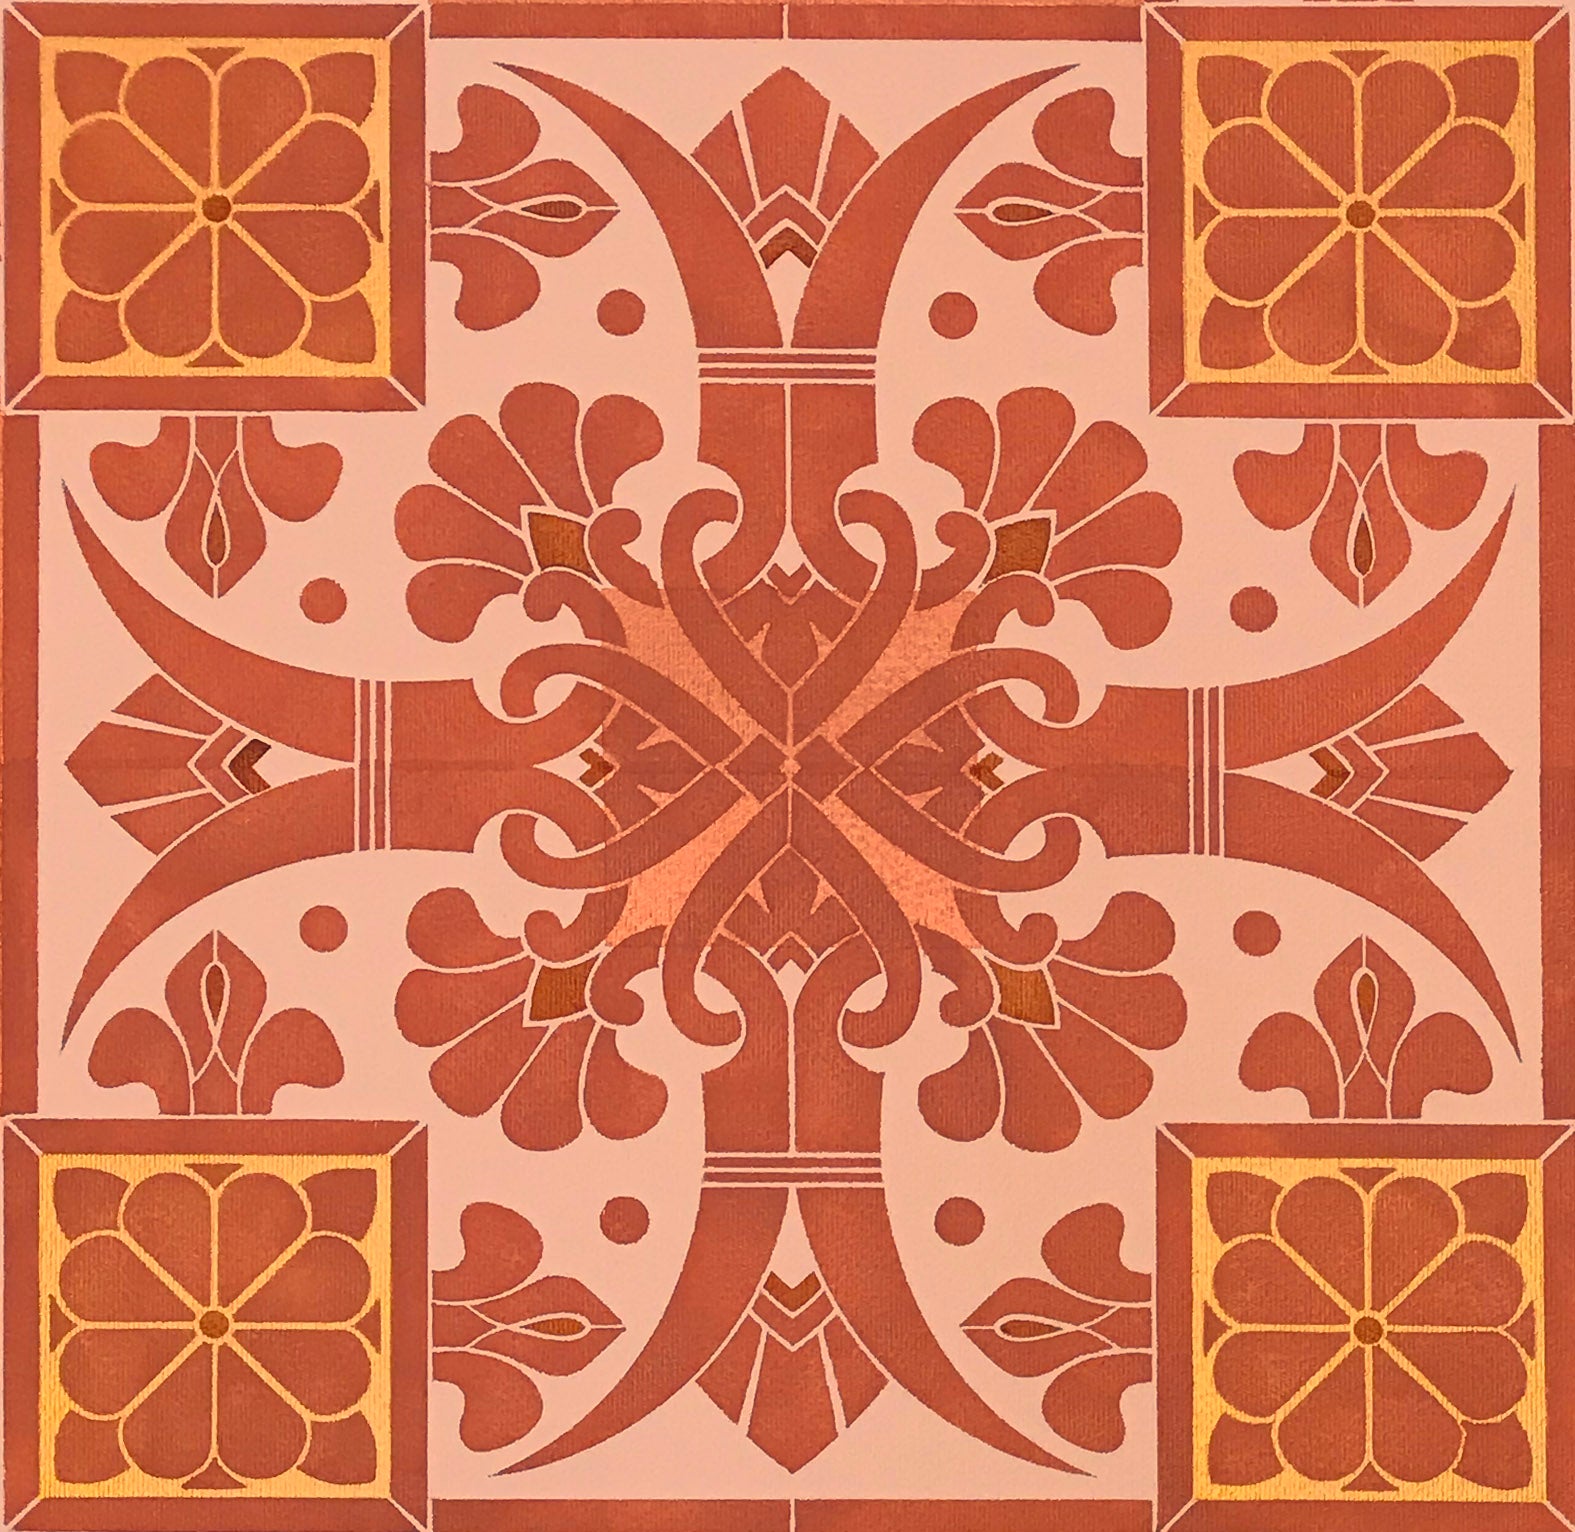 A close-up image of the stylized fleur de lis elements of this floorcloth pattern.